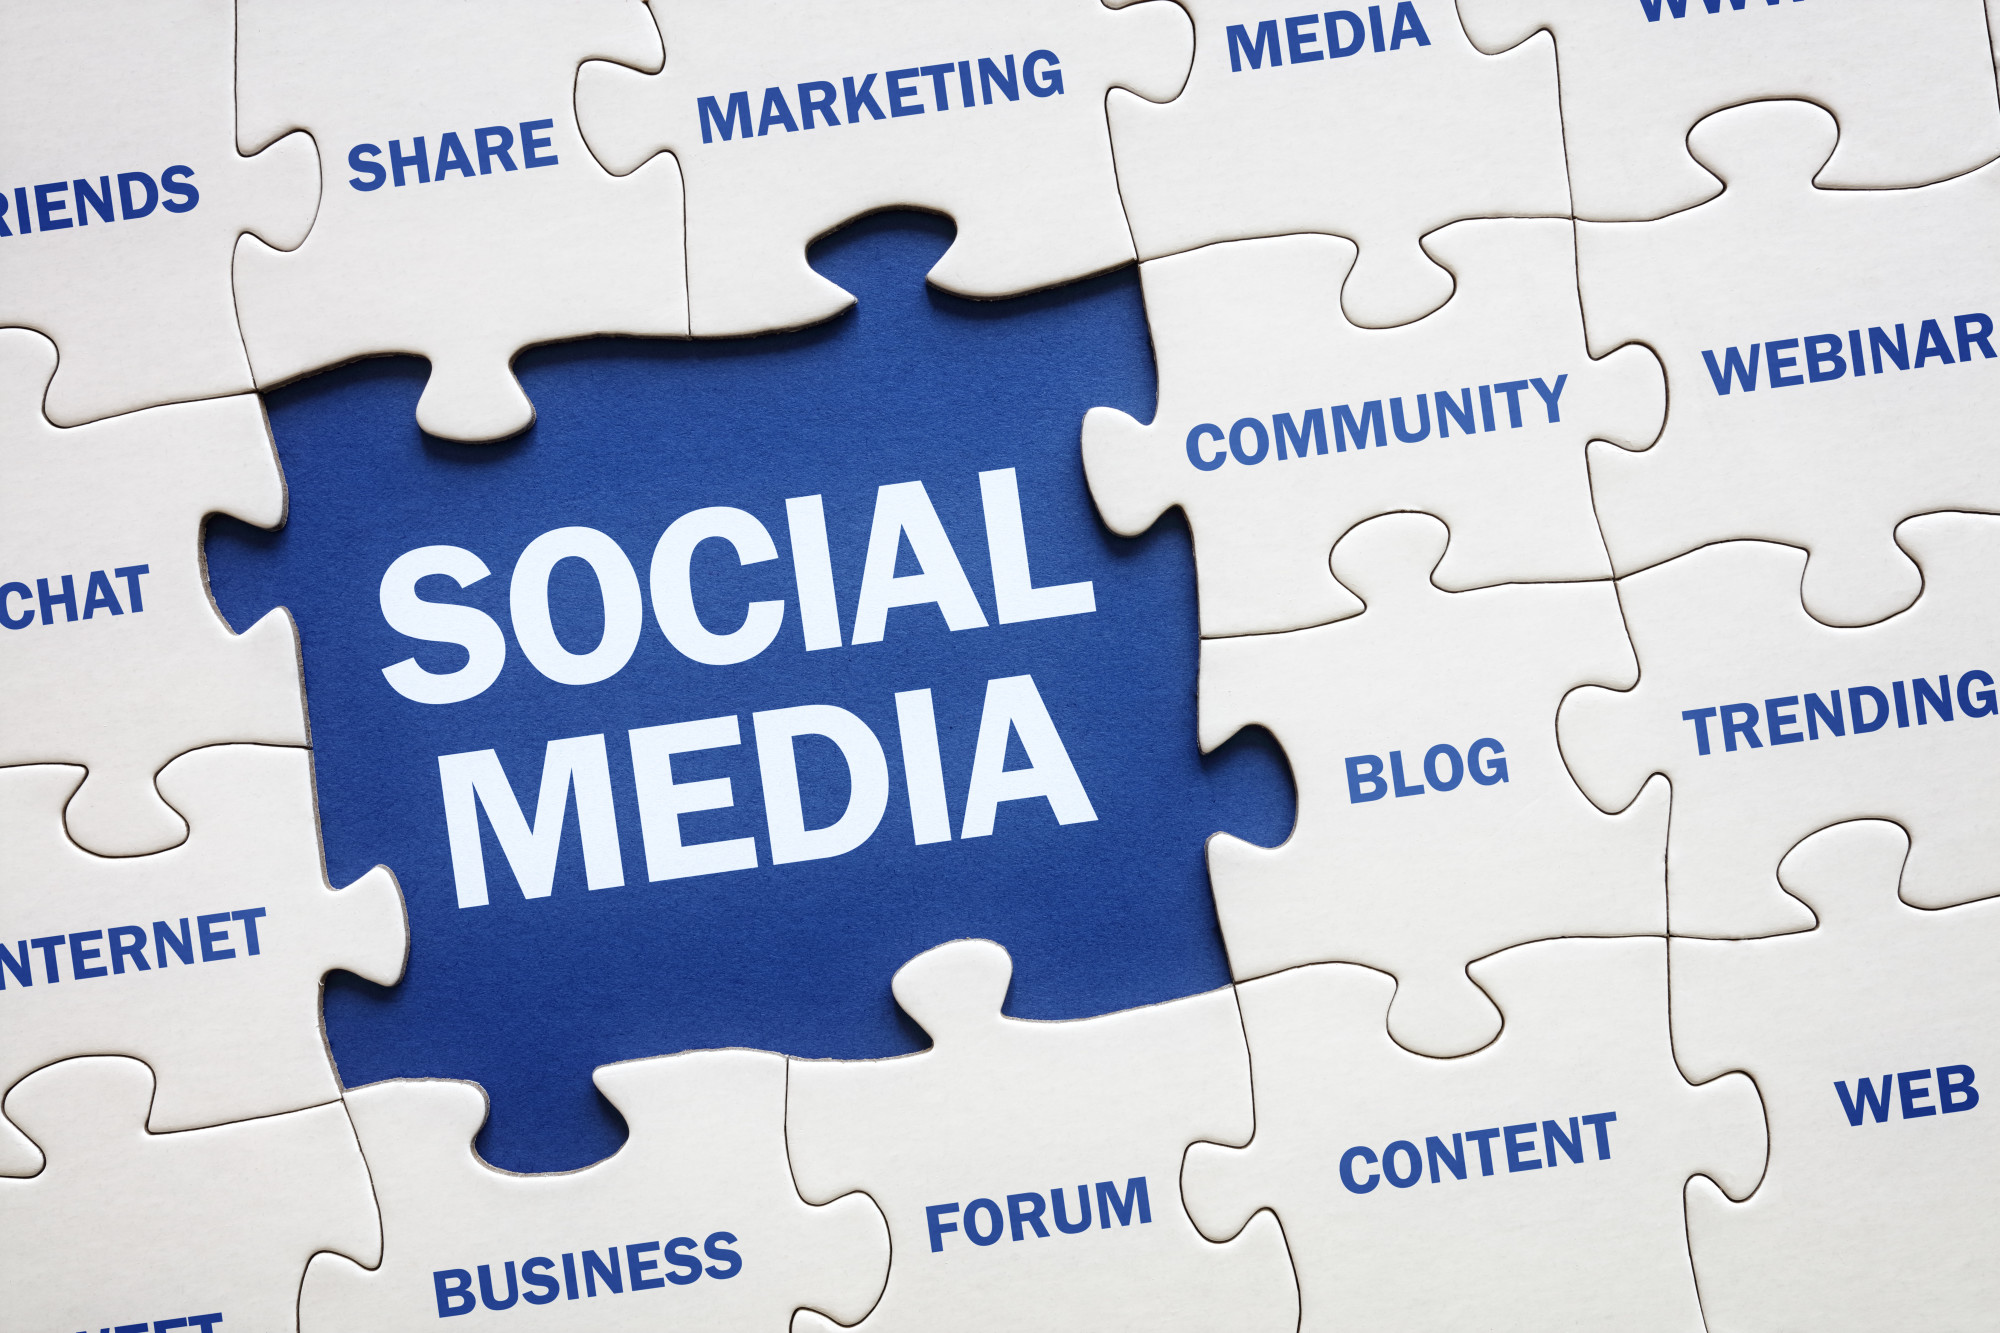 8 Tips on Using SEO and Social Media for Marketing